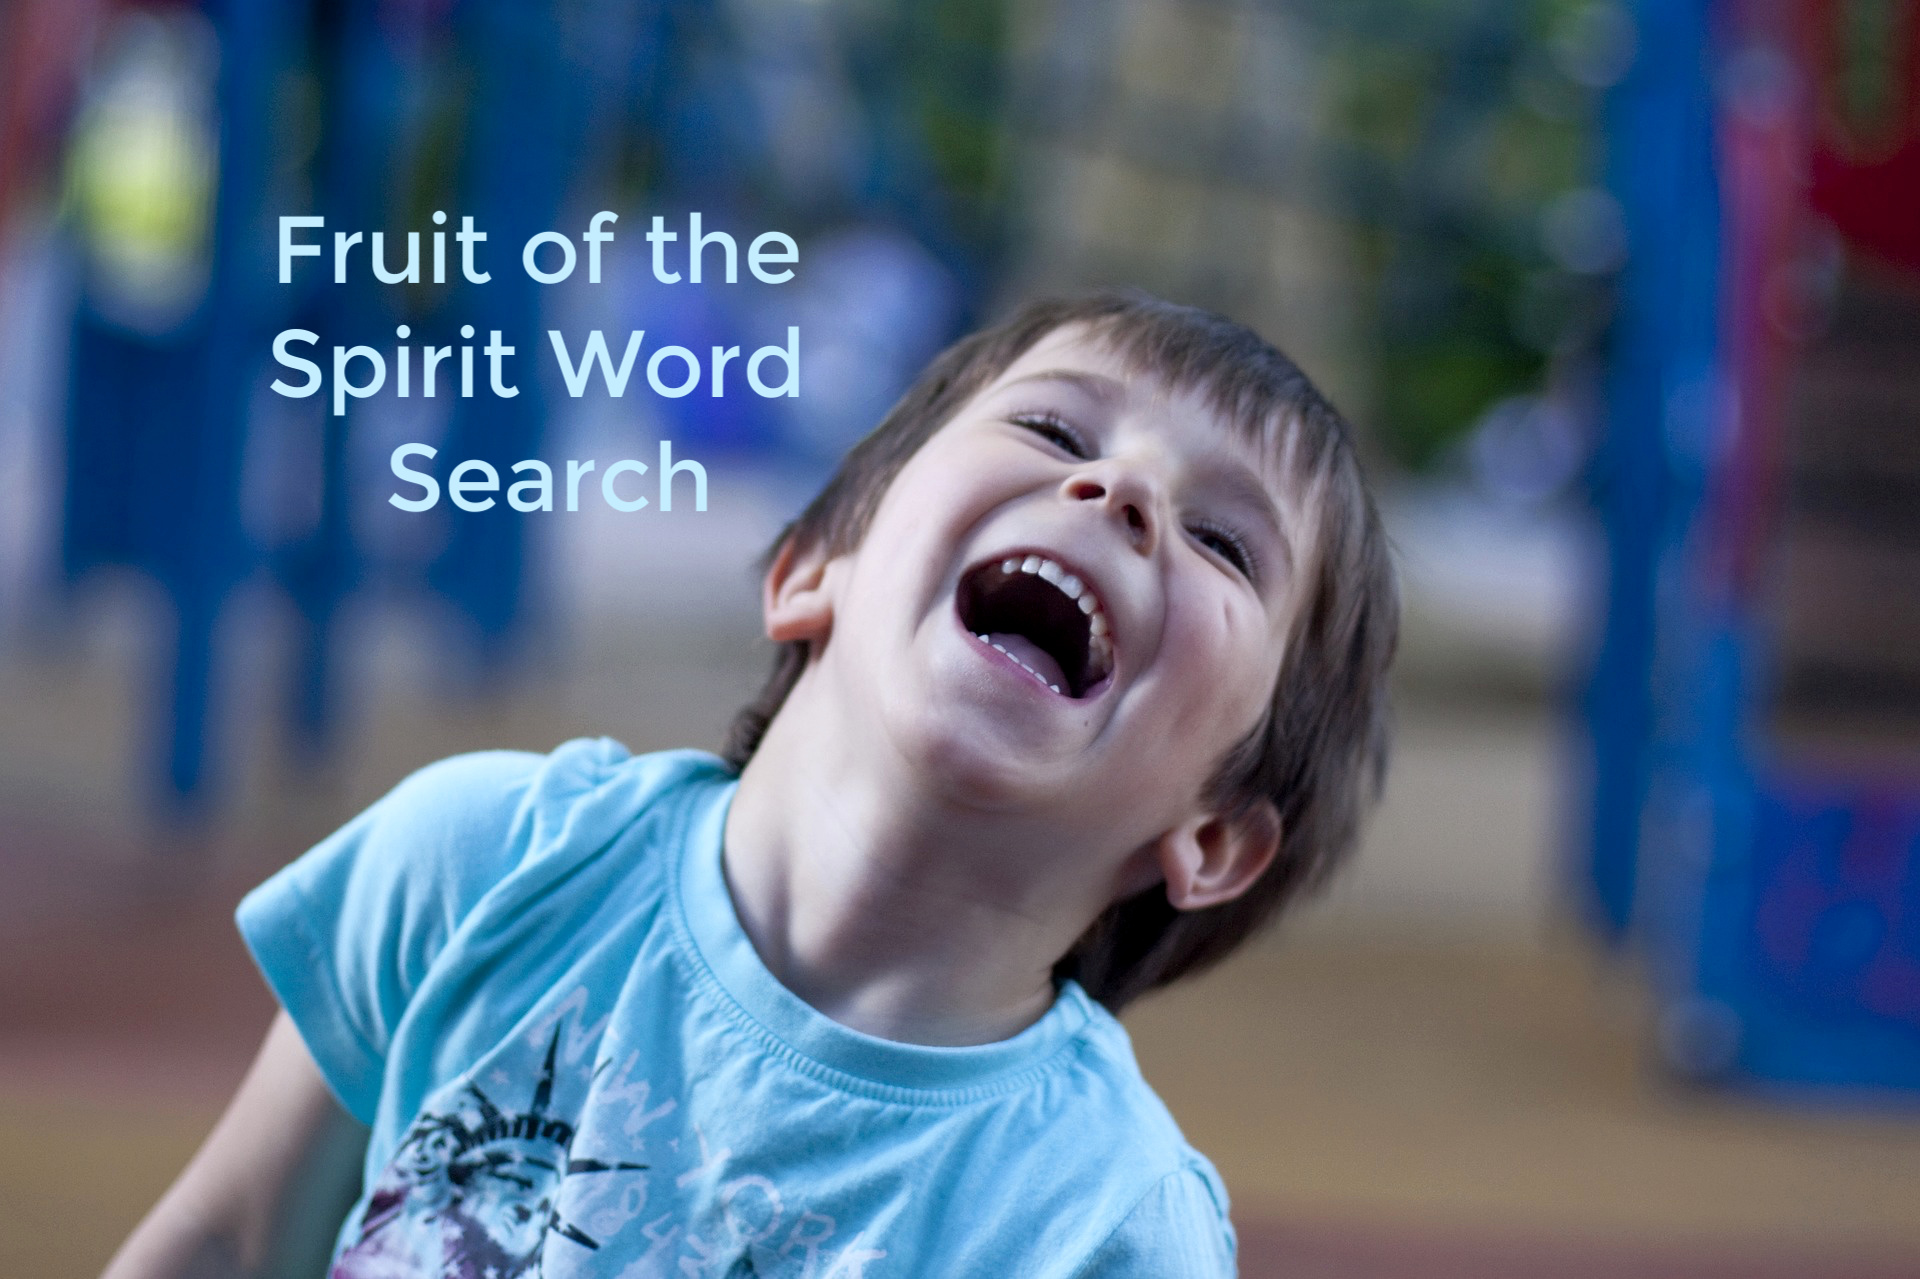 Fruit of the Spirit Word Search laughing boy